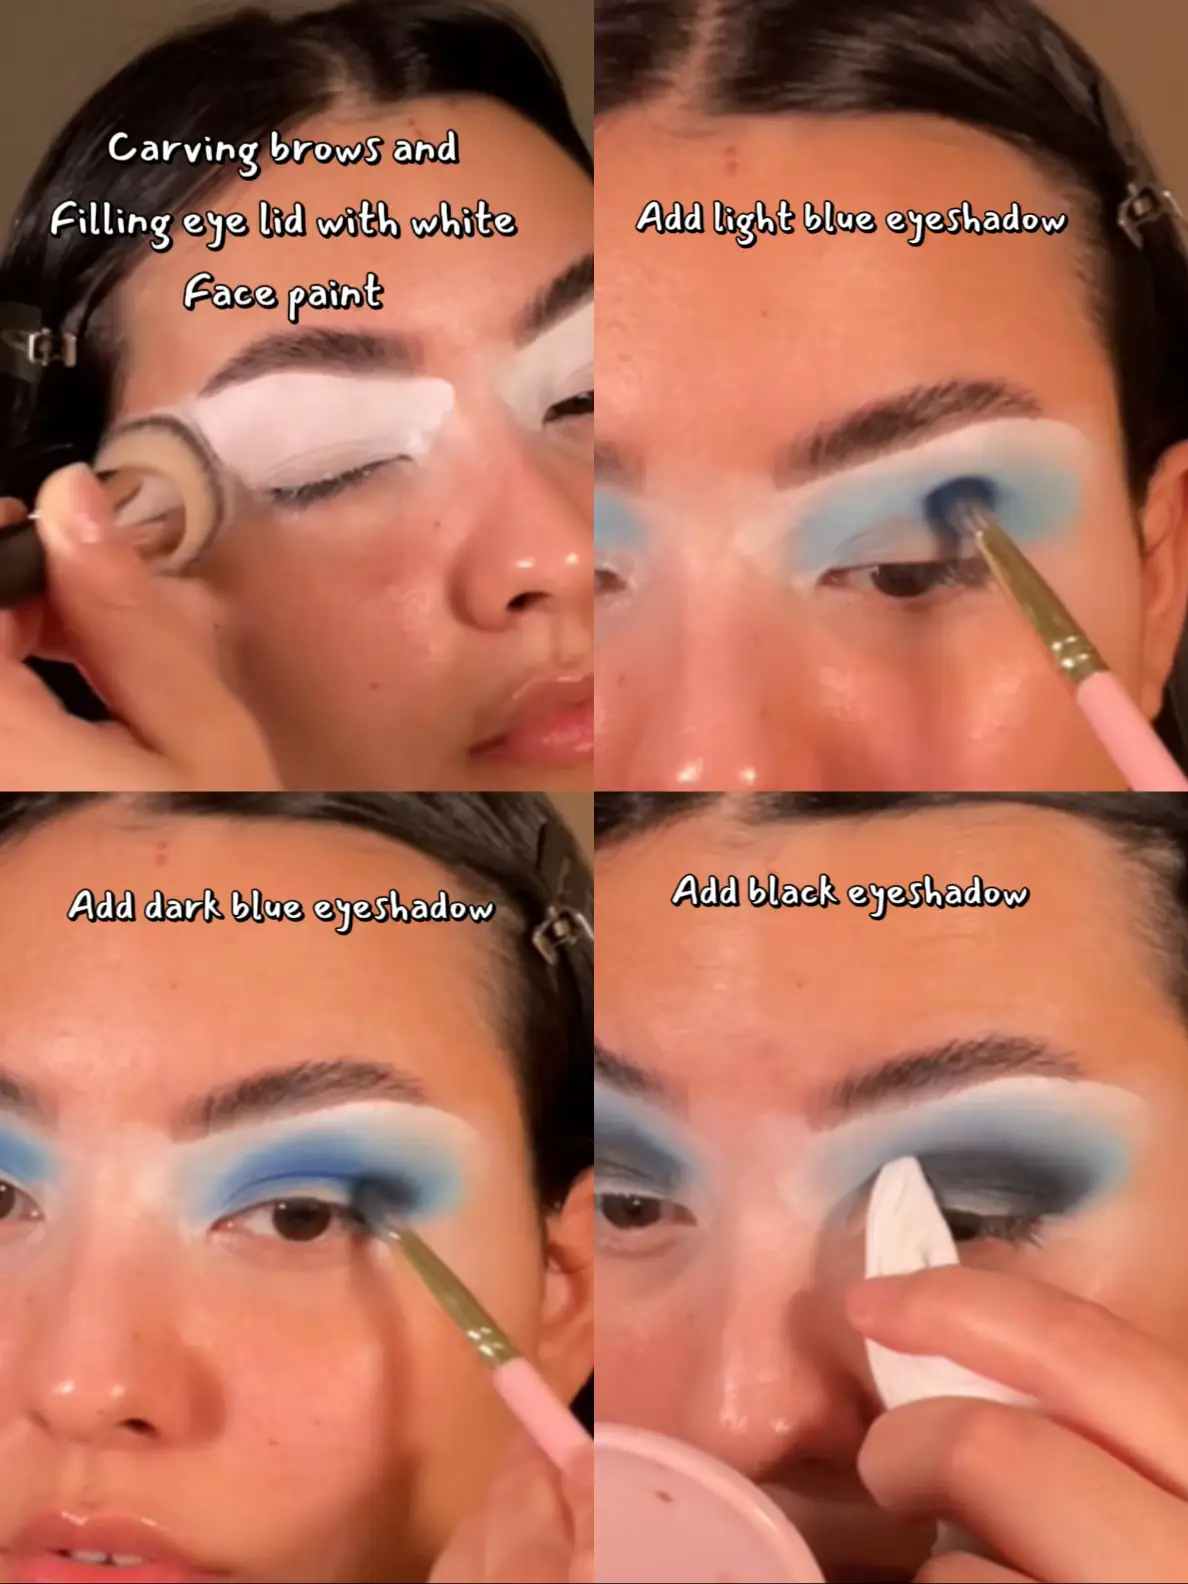 Sally Makeup Tutorial, Gallery posted by Katelynn 💗